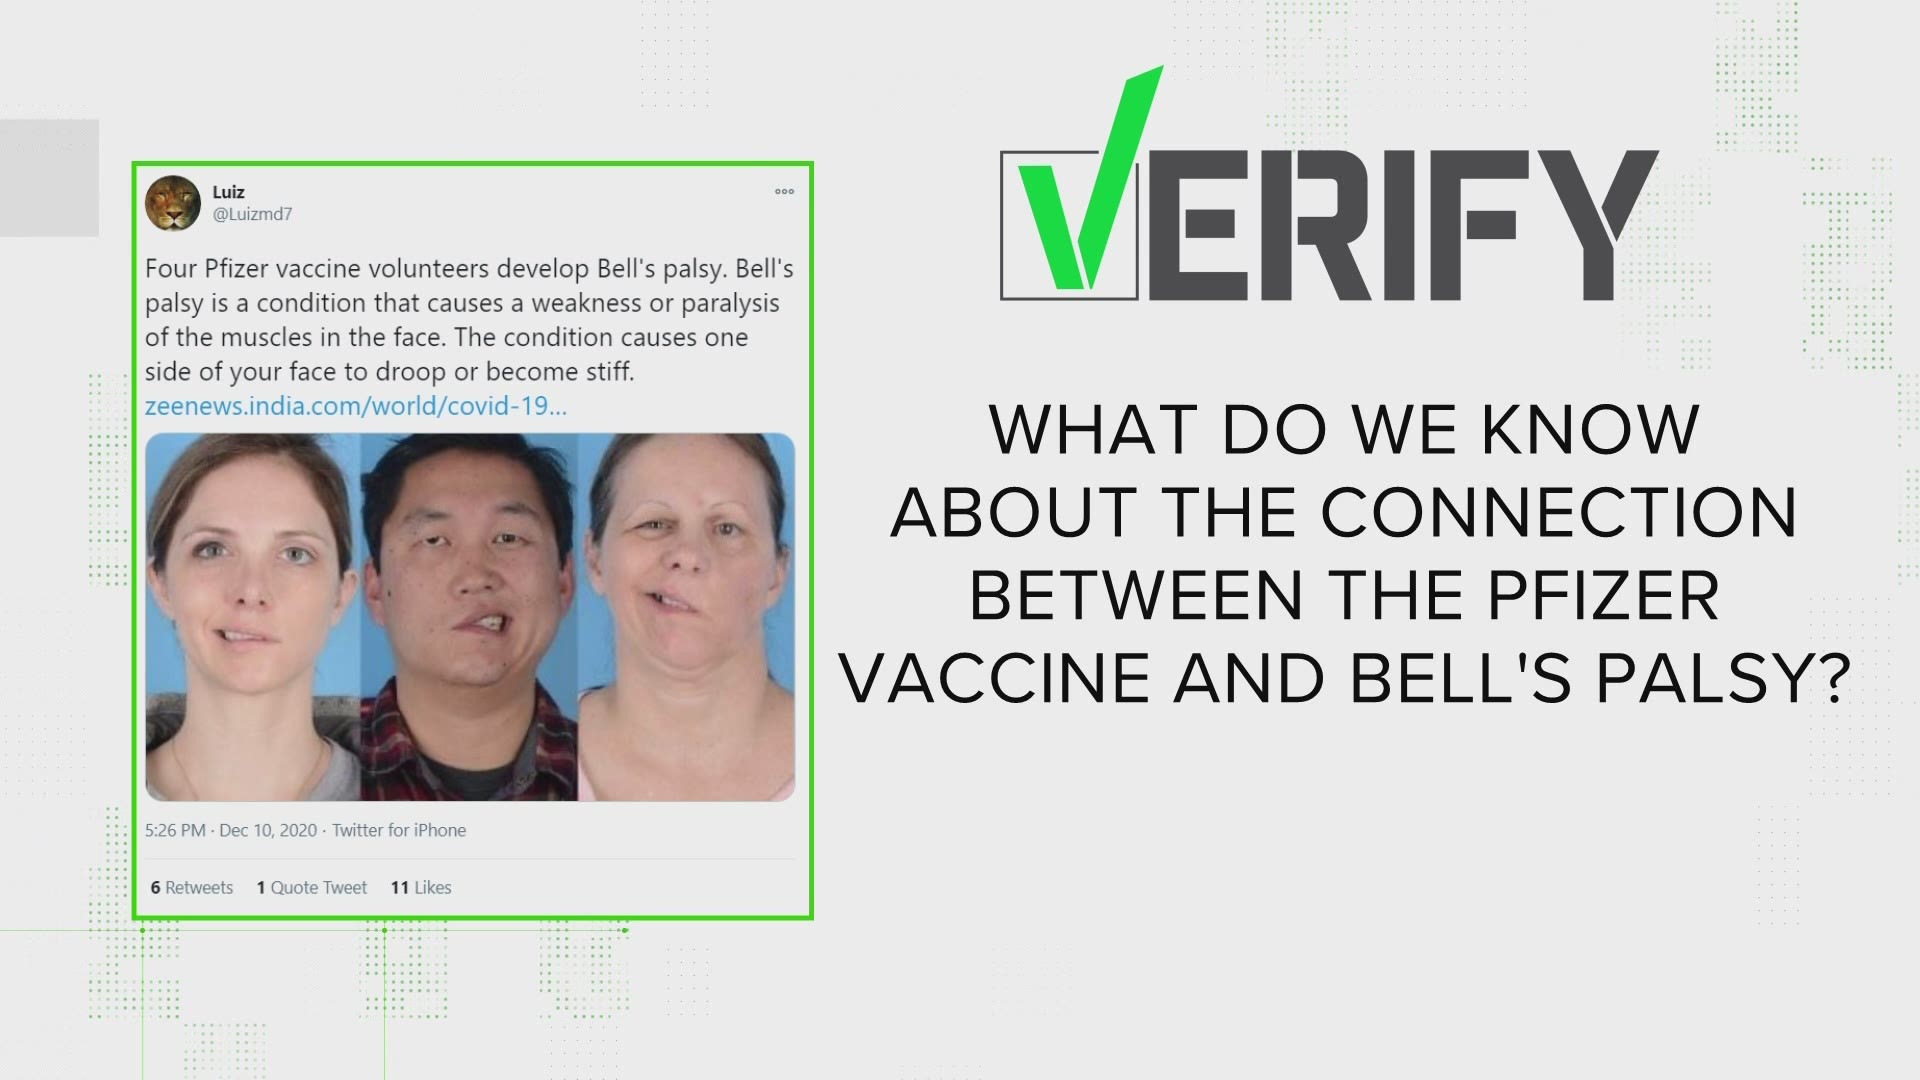 People are sharing a claim that four Pfizer vaccine volunteers developed Bell's Palsy during the trial. What's the connection between the vaccine and Bell's palsy?